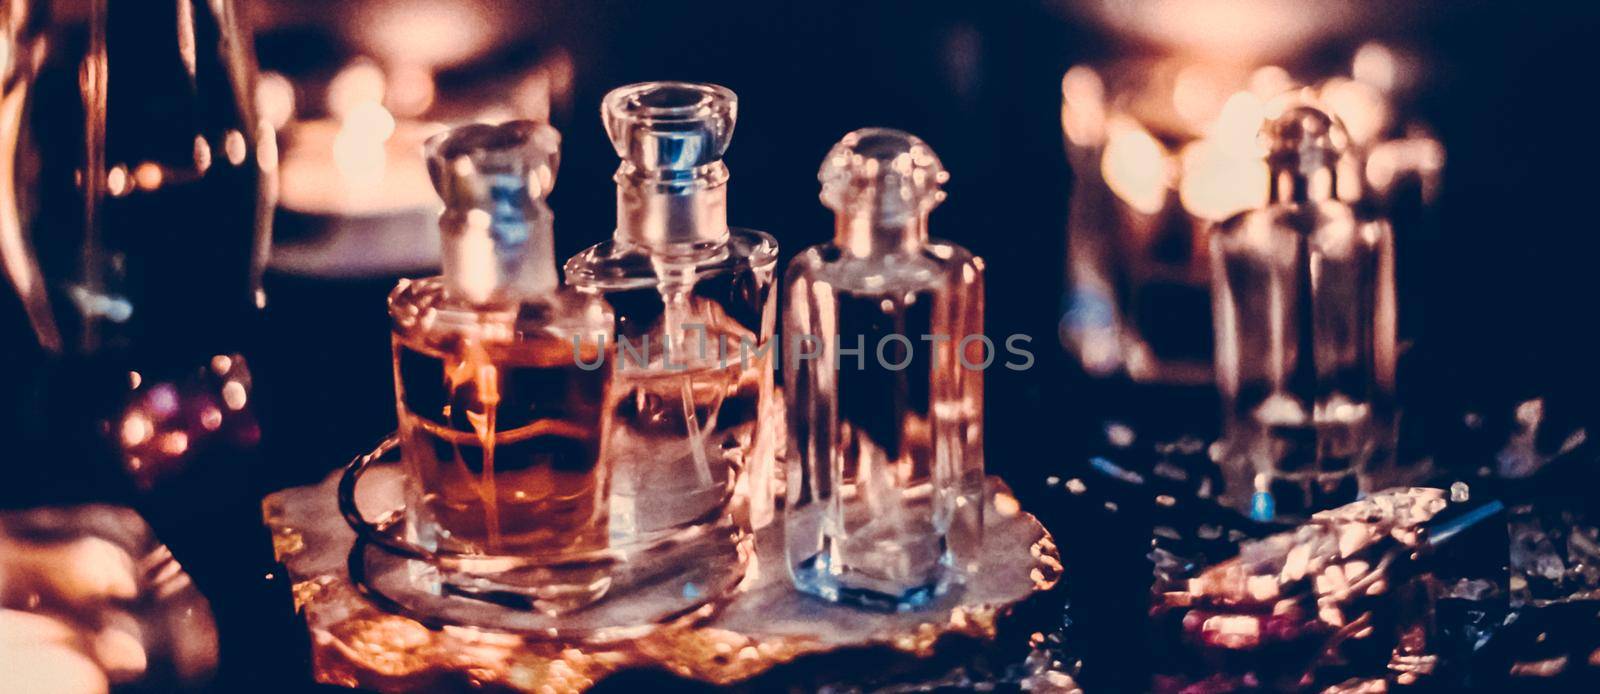 Perfume bottles and vintage fragrance at night, aroma scent, fragrant cosmetics and eau de toilette as luxury beauty brand, holiday fashion parfum design by Anneleven